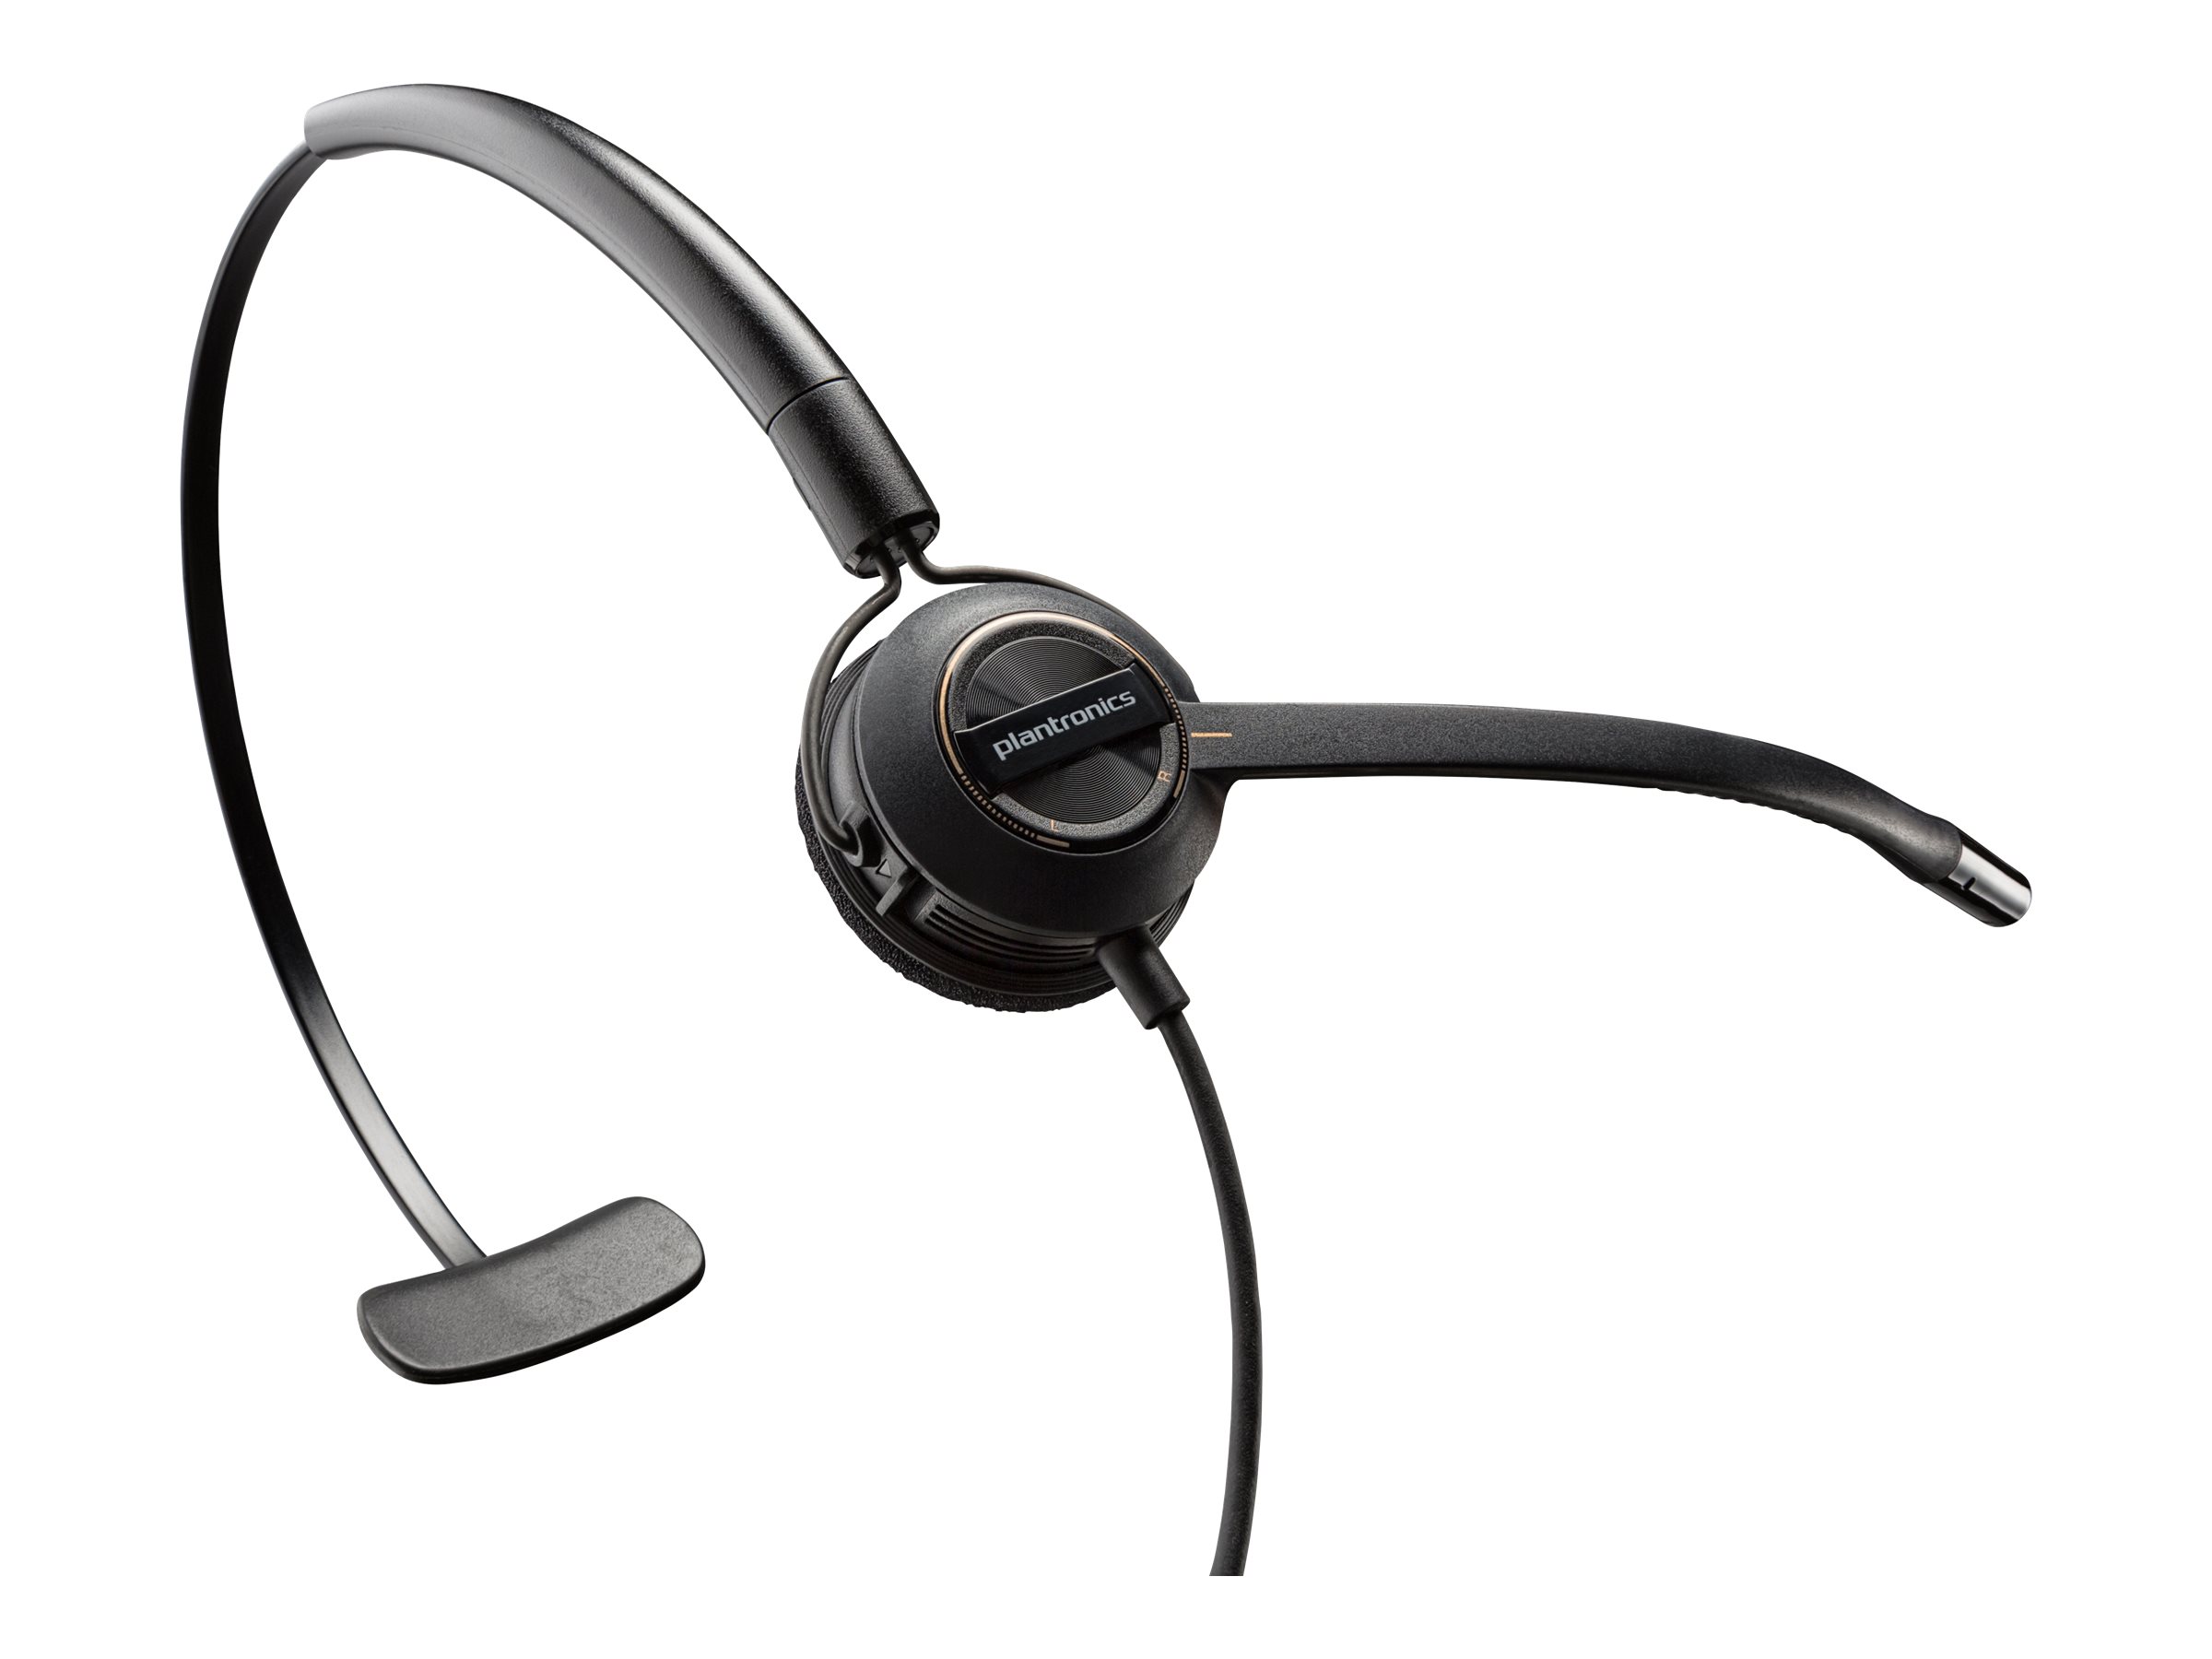 HP Poly EncorePro 540D with Quick Disconnect Convertible Digital Headset TAA